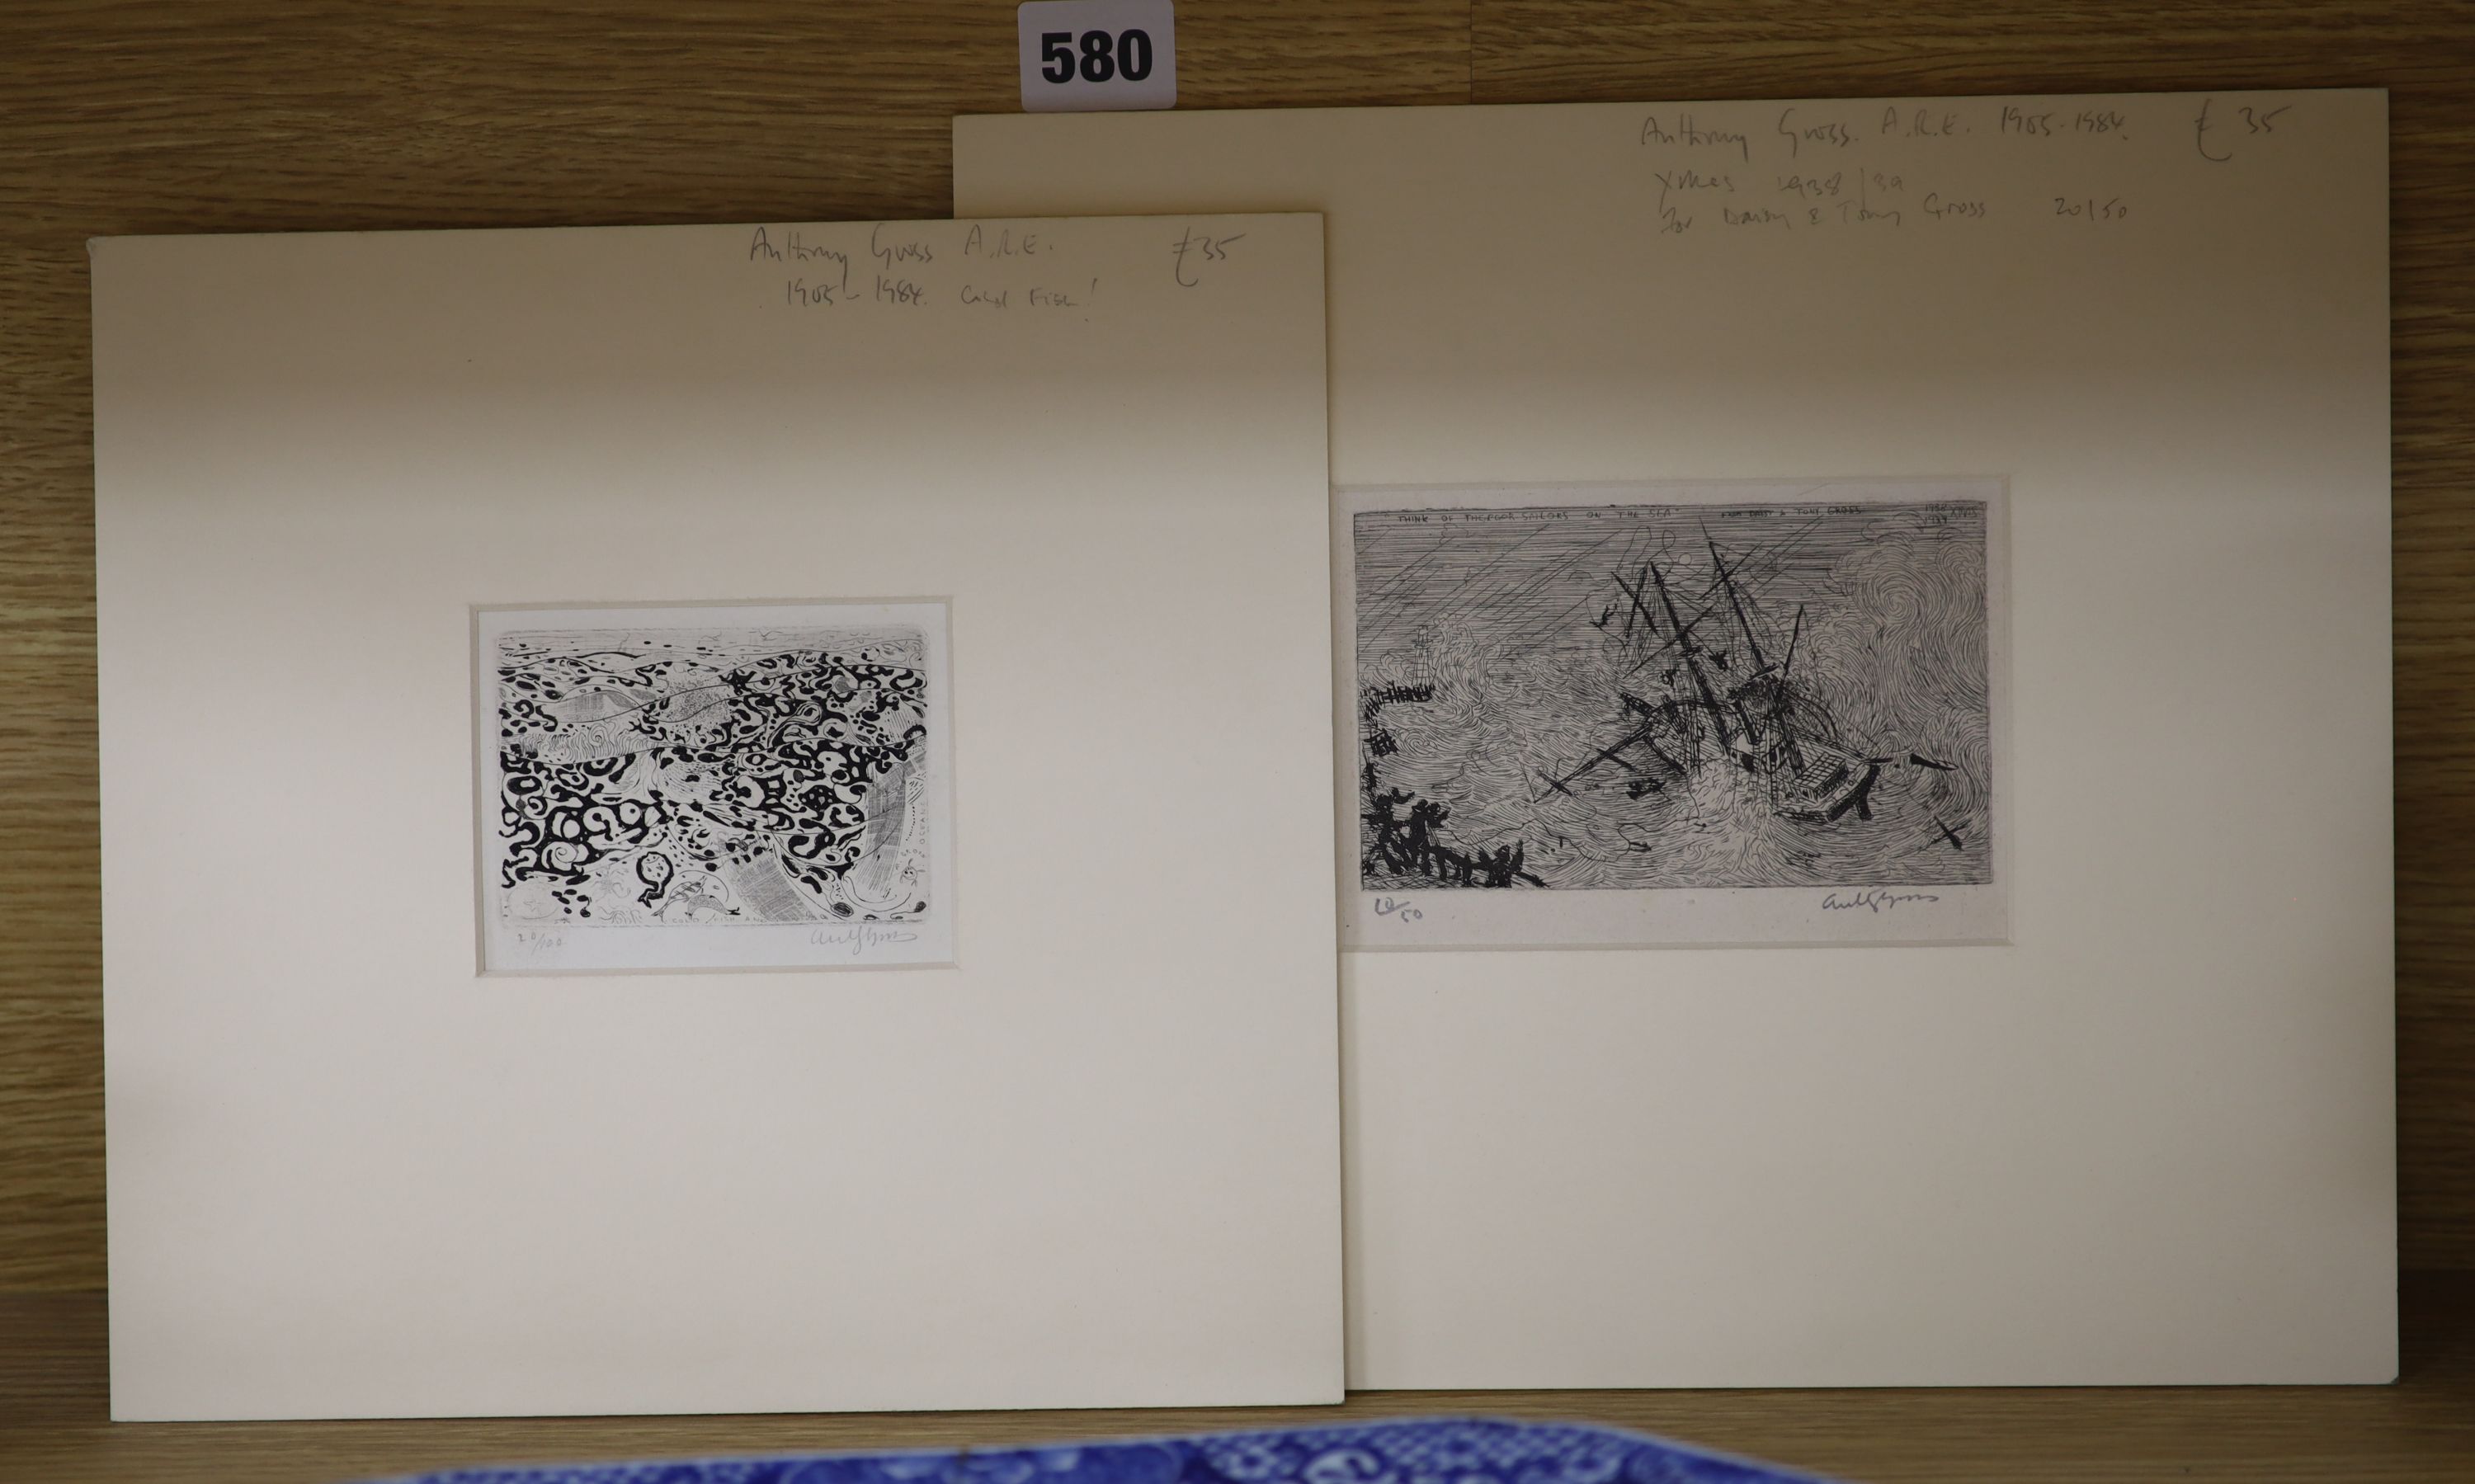 Anthony Gross (1905-1984), two etchings, ‘Think of the poor sailors on the sea, Xmas 1938’ & ‘Cold fish’, signed in pencil, 10/50 & 20/100, 7.5 x 12.5cm & 6 x 9cm. unframed